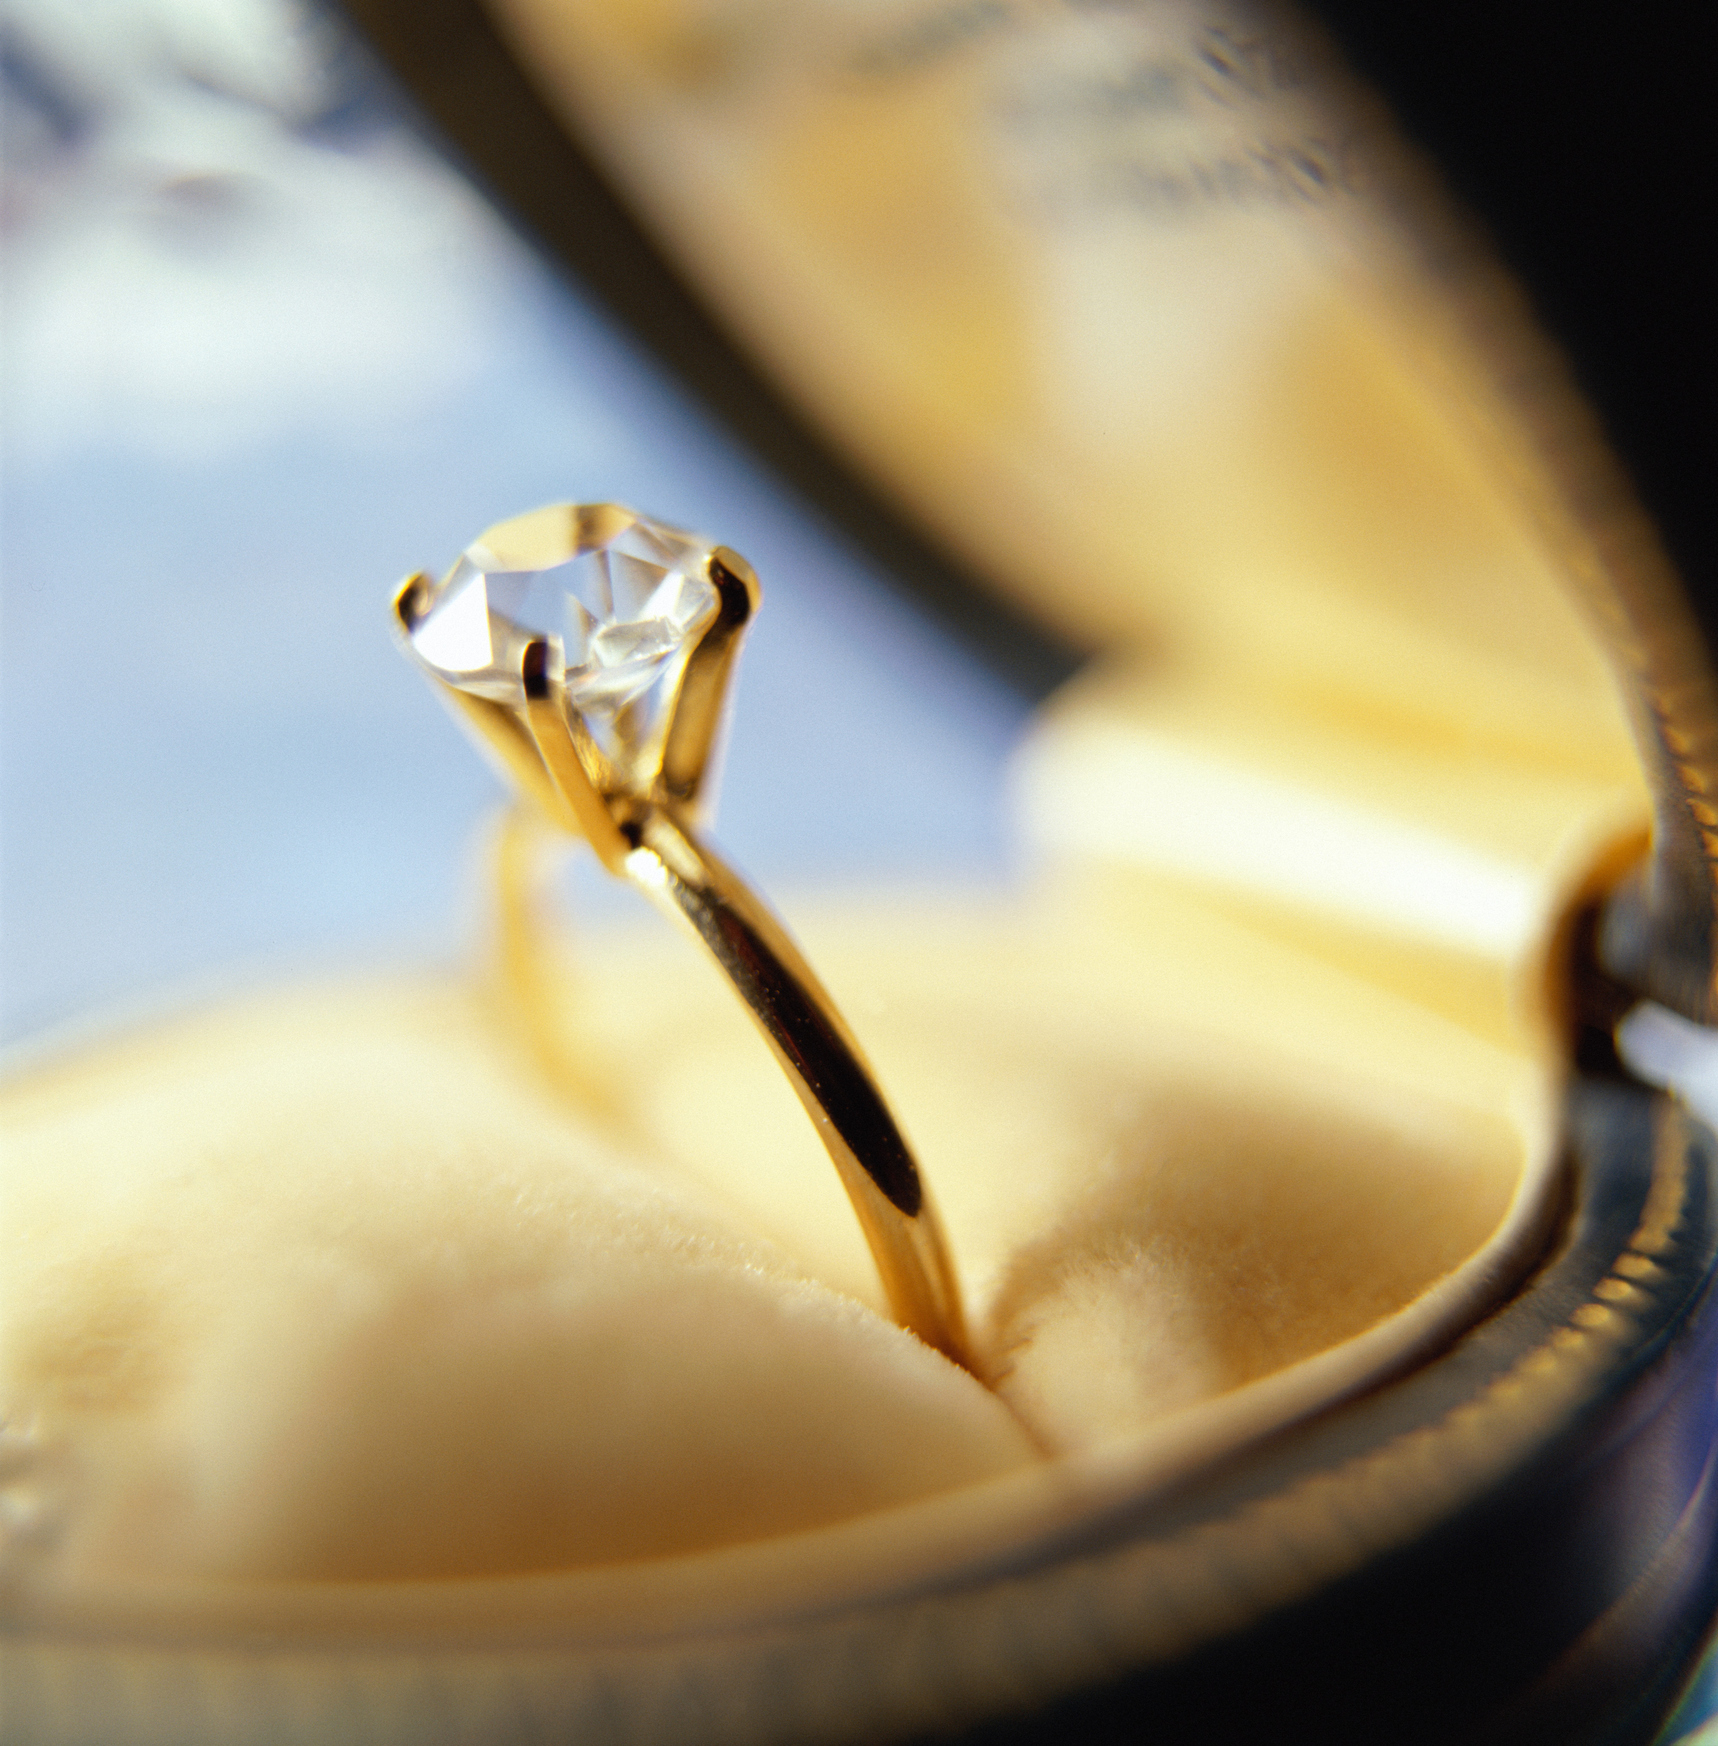 A close-up of a gold engagement ring with a single round-cut diamond displayed in an open ring box